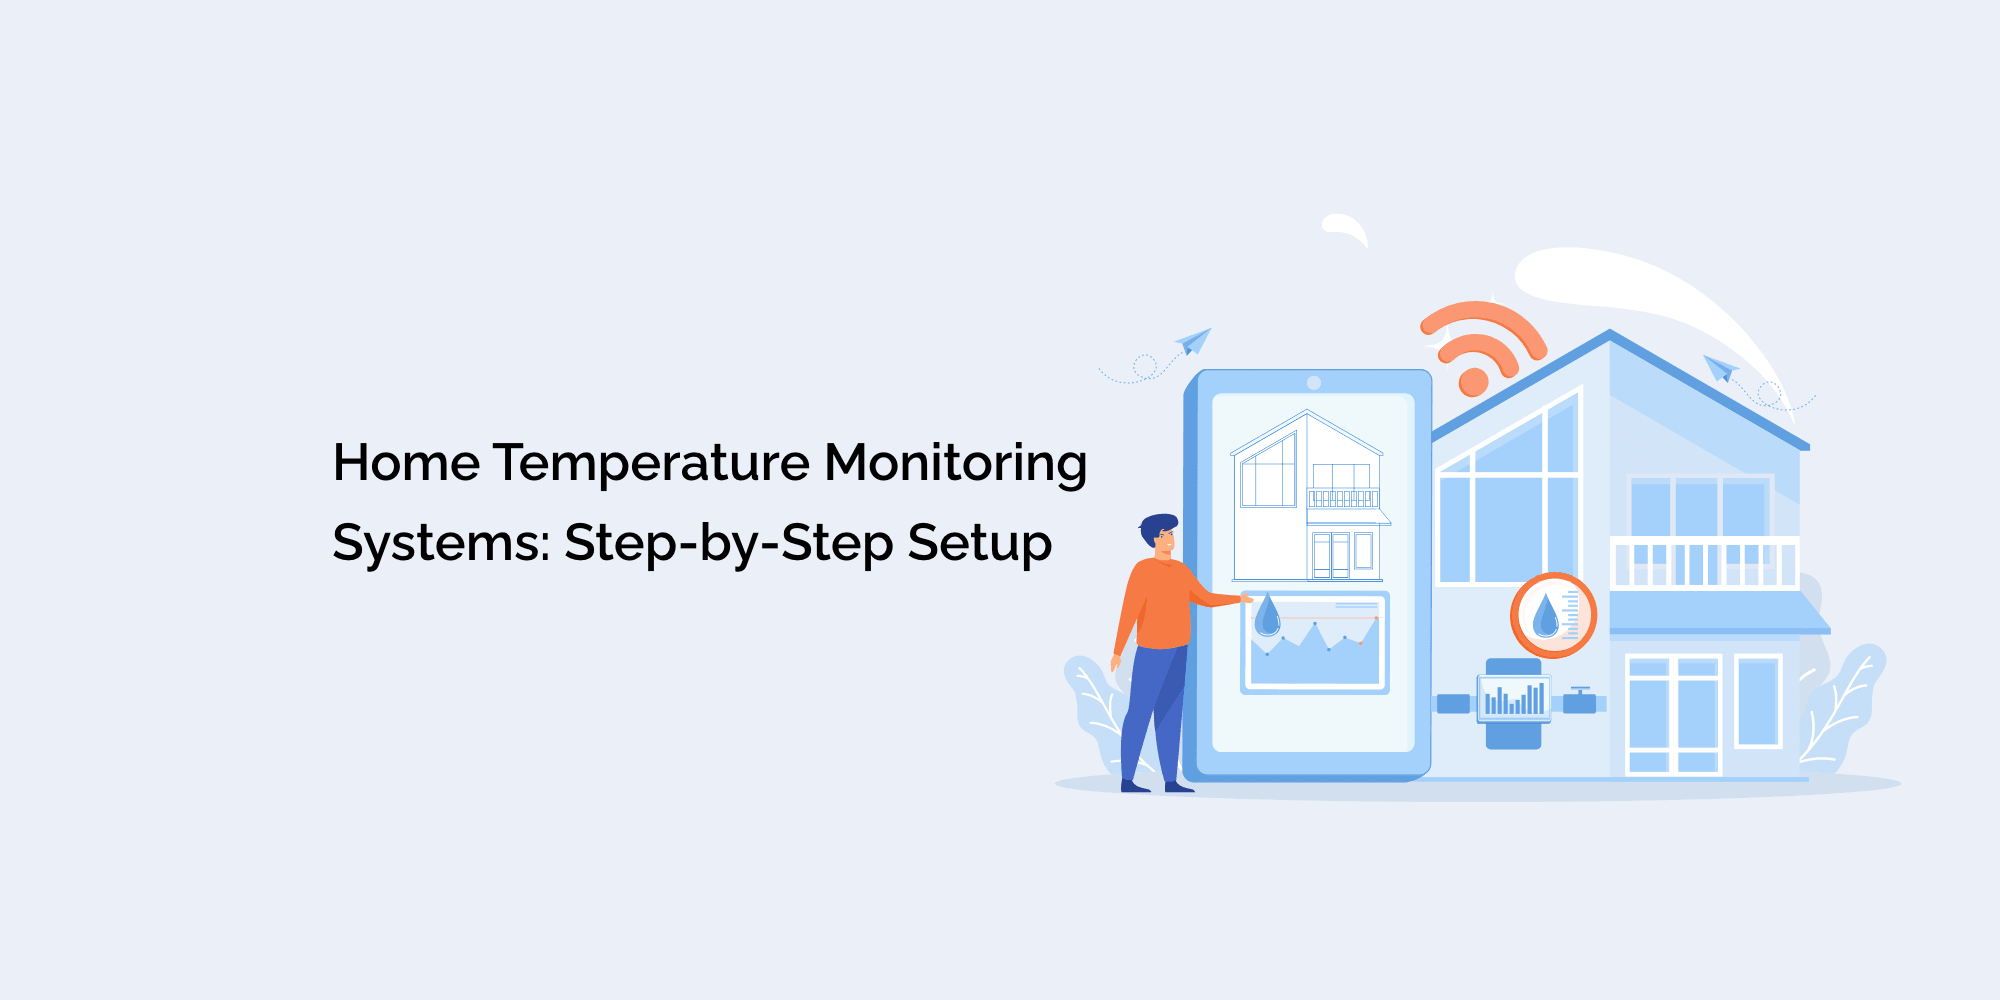 Home Temperature Monitoring Systems: Step-by-Step Setup